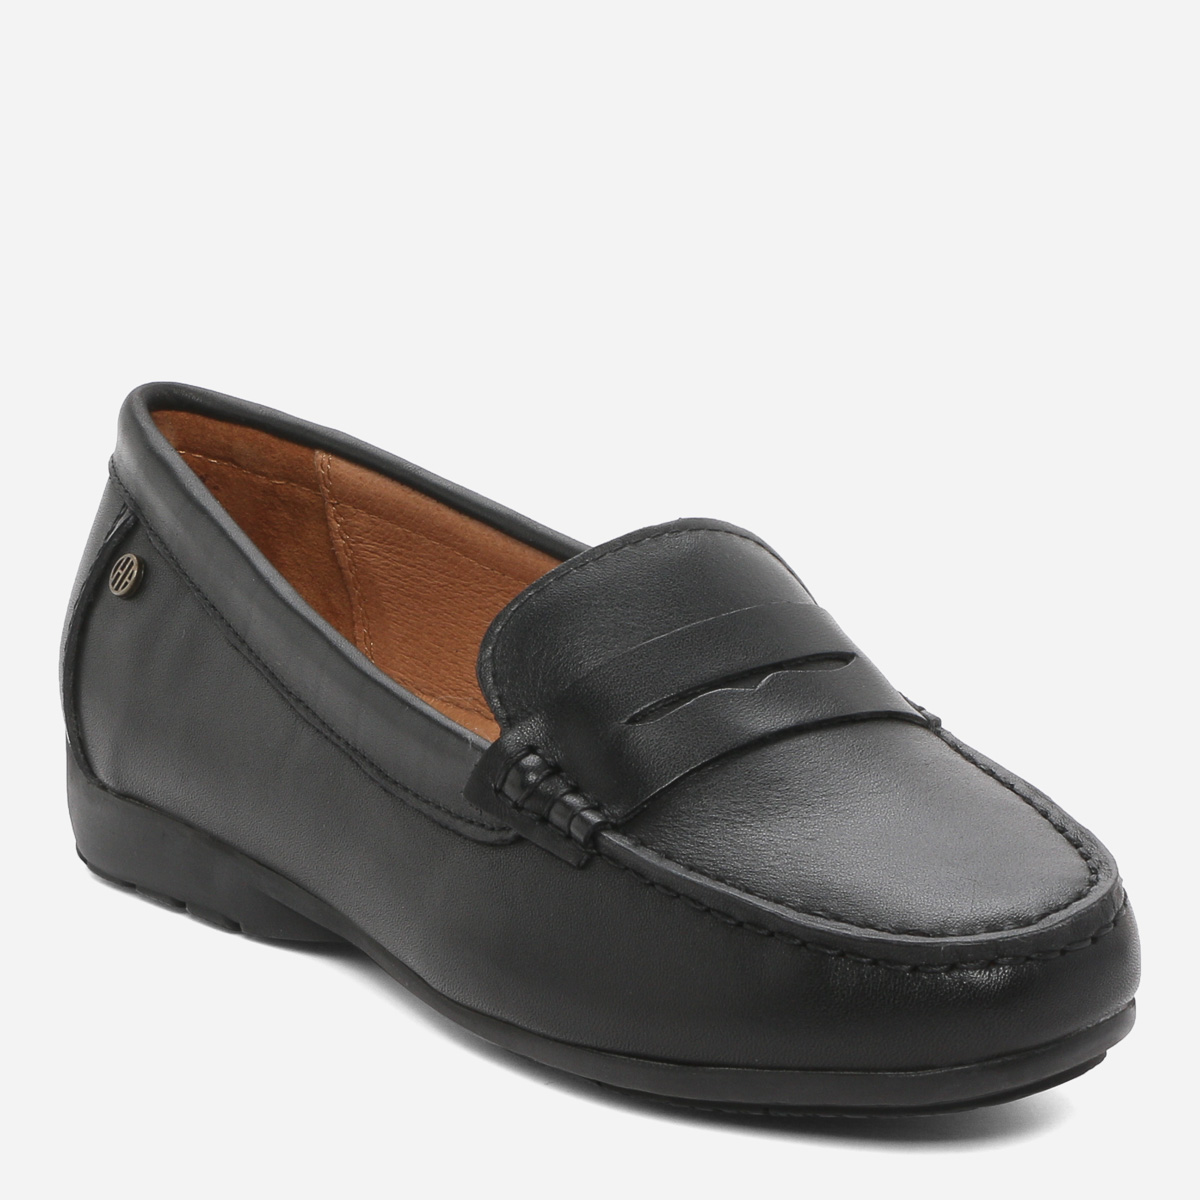 Hush Puppies Ladies' Toni Penny Loafers 